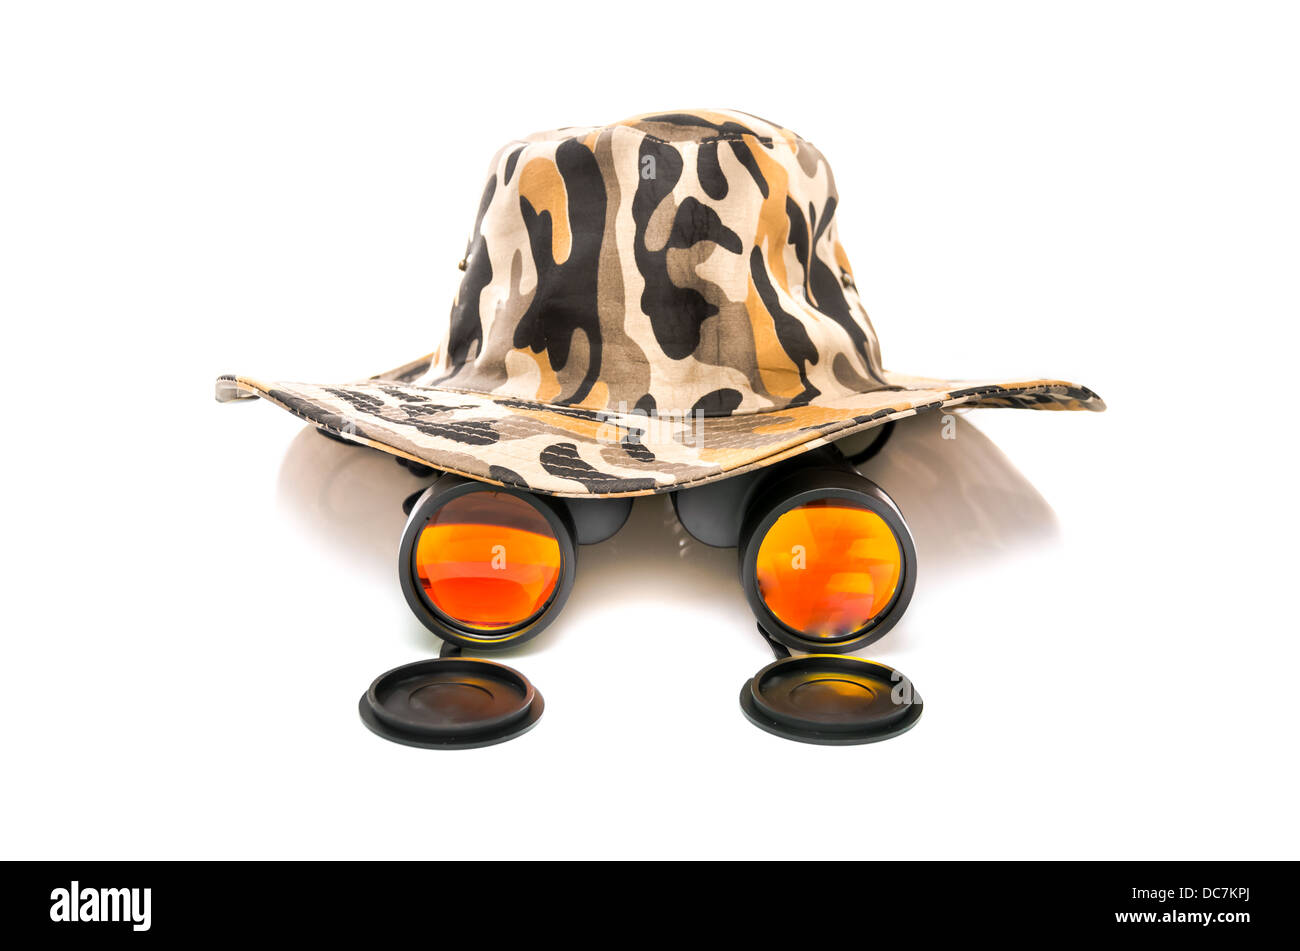 Binoculars and a safari hat on a white background conceptual of travel, adventure and eco-tourism or a wildlife safari Stock Photo